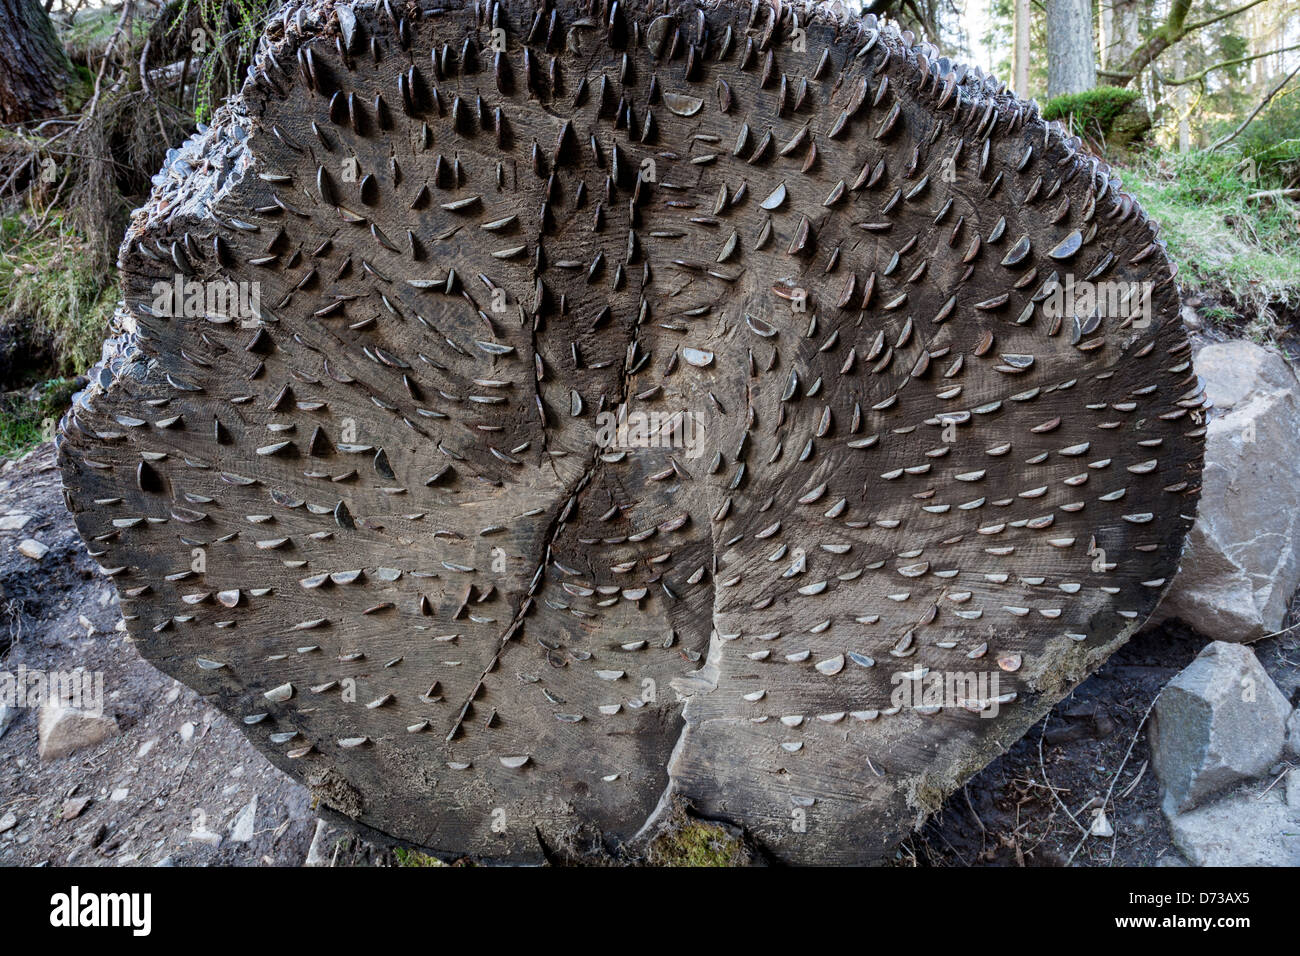 Coins in a tree trunk at Tarn Hows, near Hawkshead, Lake Dsitrict, Cumbria Stock Photo